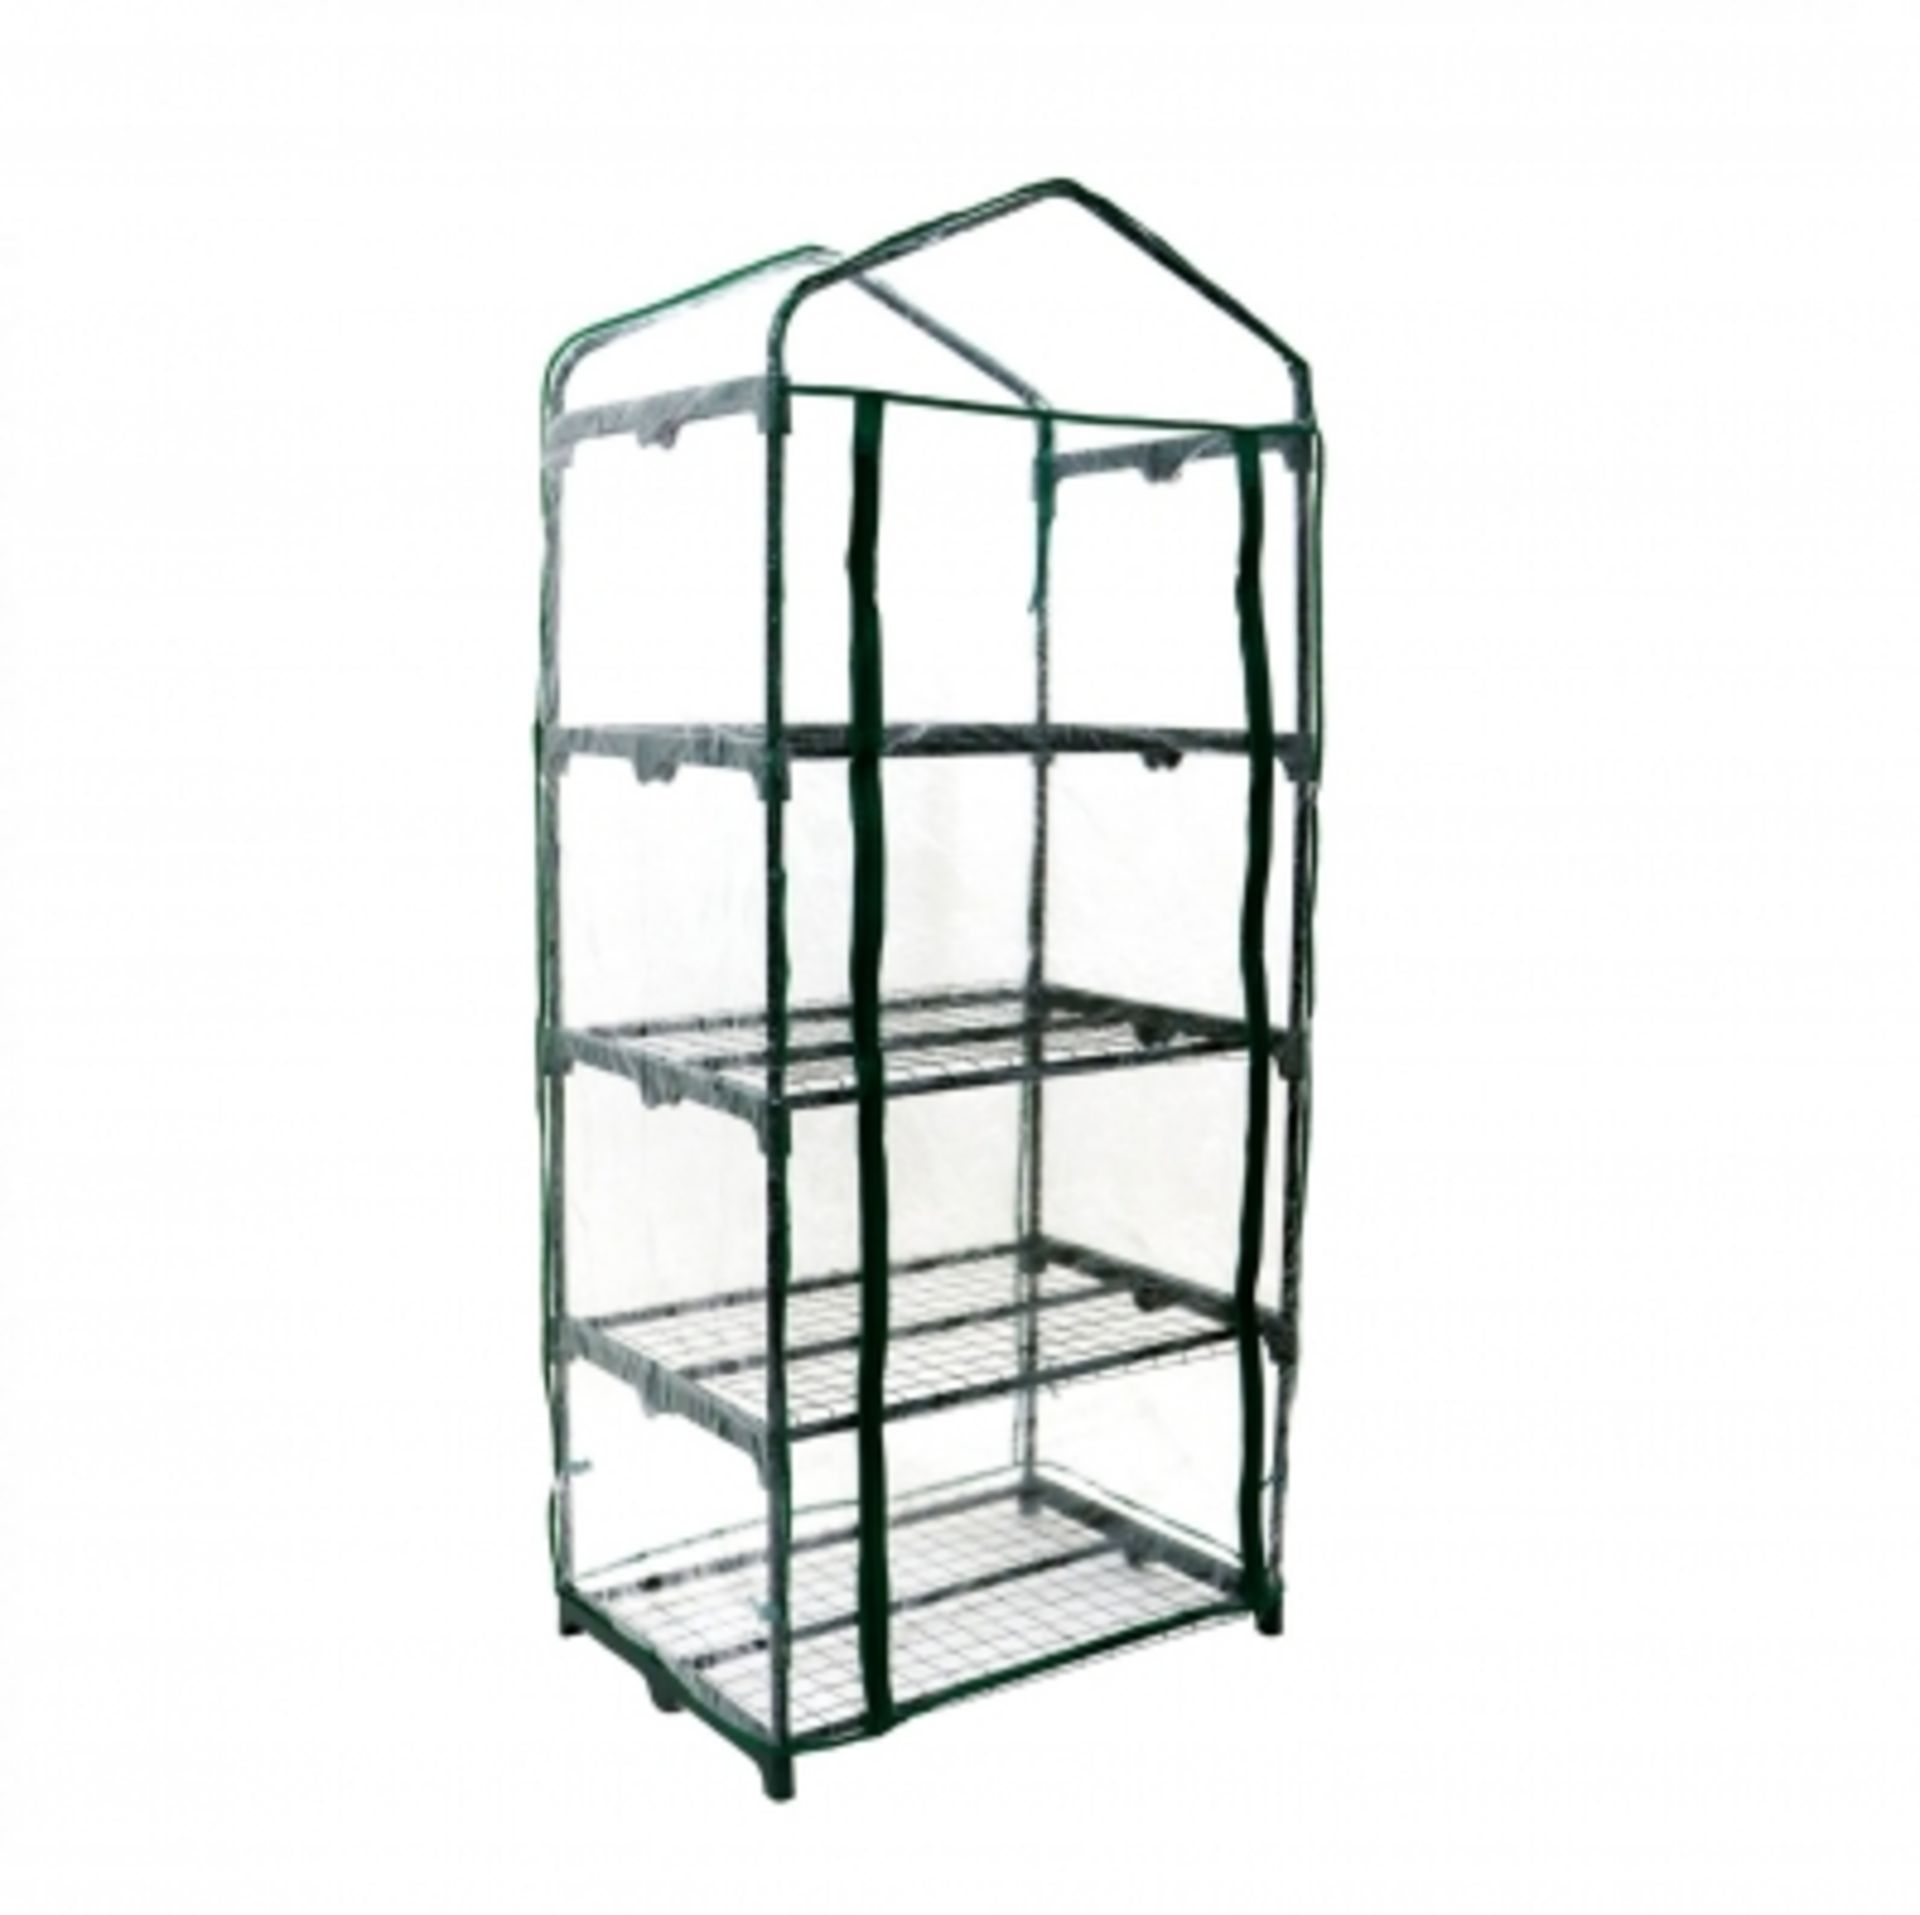 (RL38) 4-Tier Mini Greenhouse Our 4-tier Grow House provides plenty of shelf area and p...